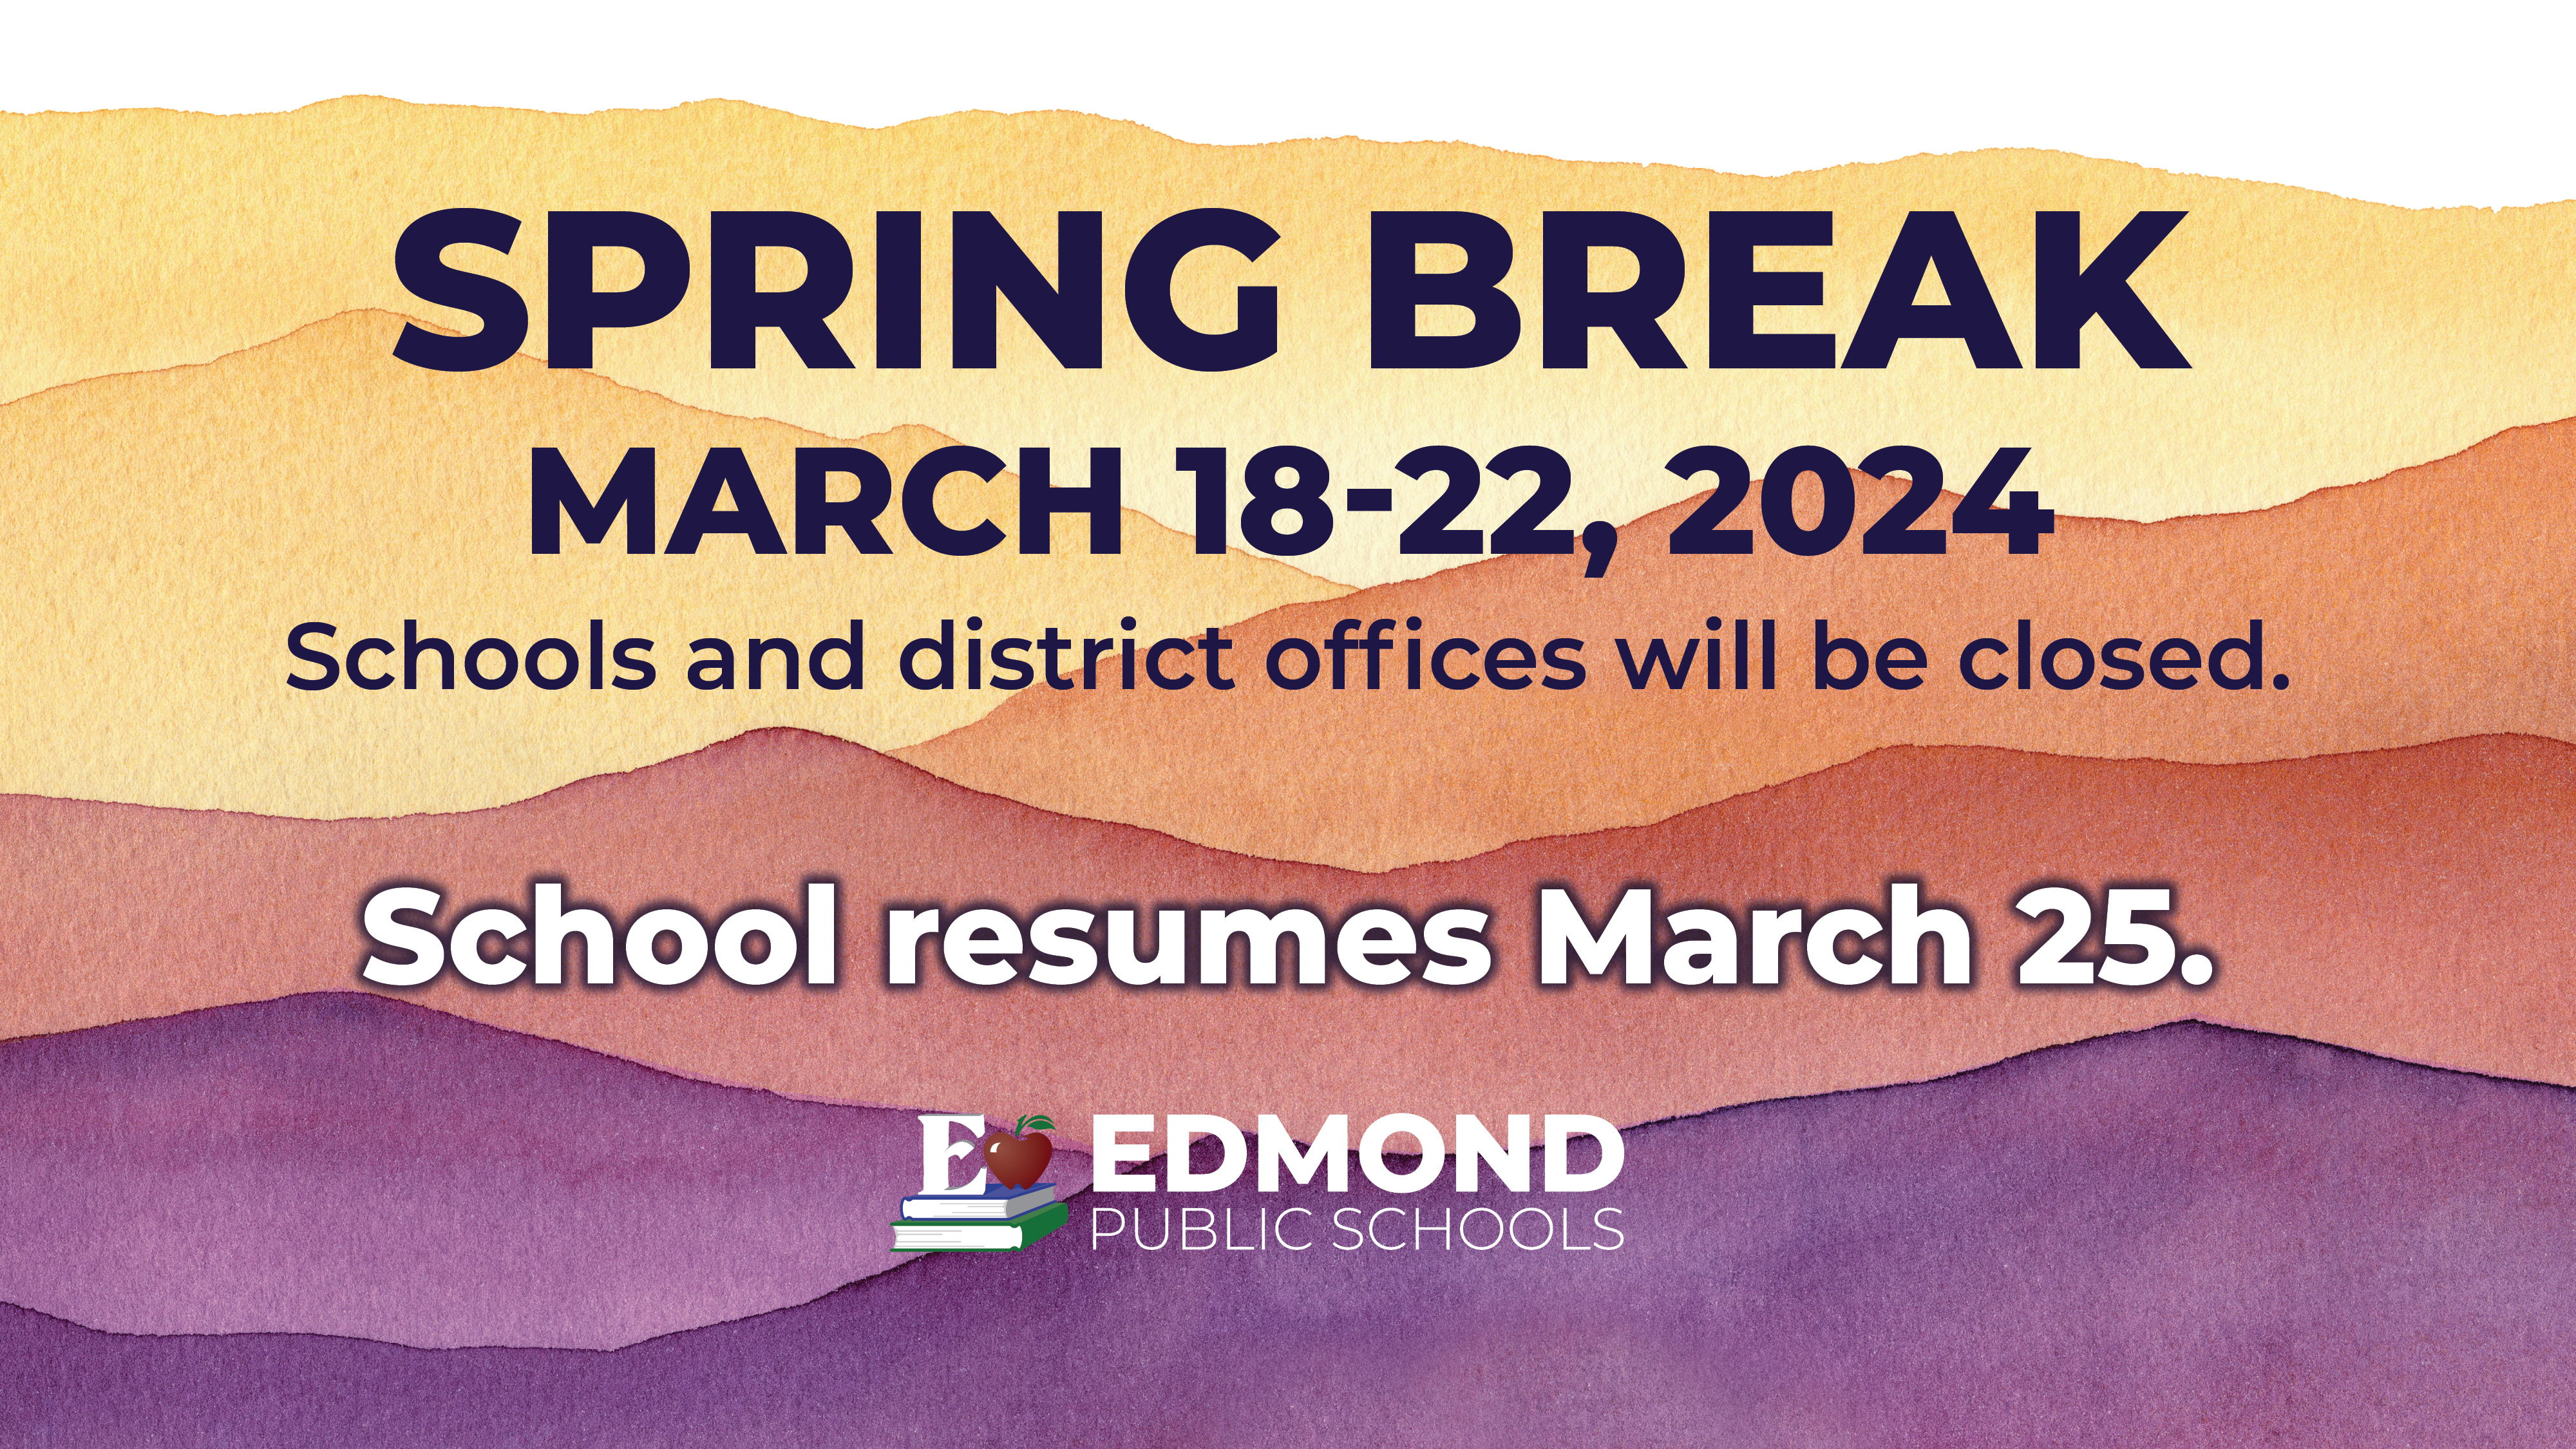 Spring break March 18-22, 2024. Schools and offices will be closed. School resumes March 25. Edmond Public Schools